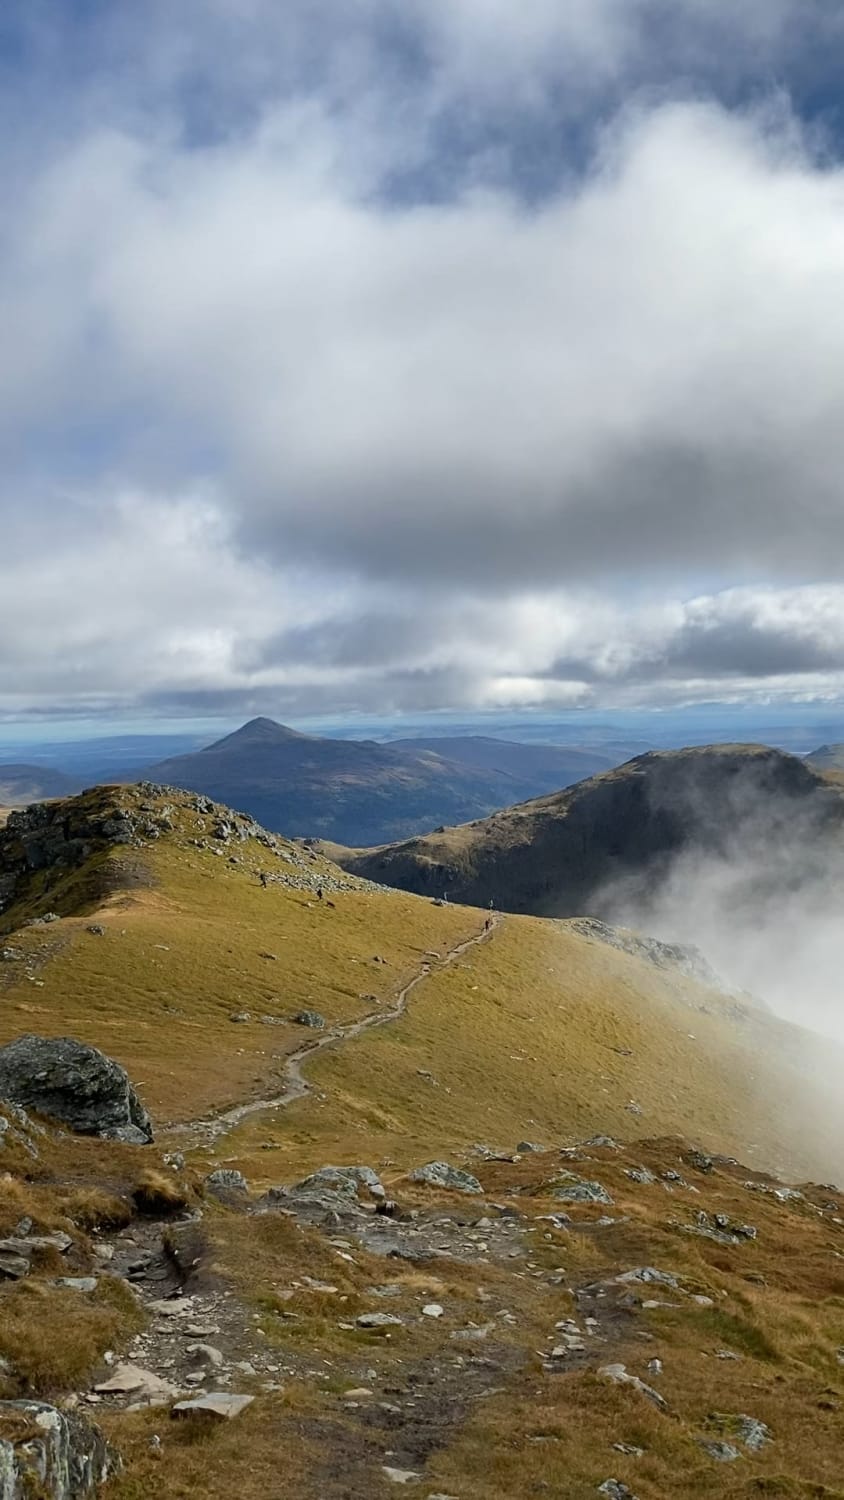 From the top of Beinn Ime, Scotland